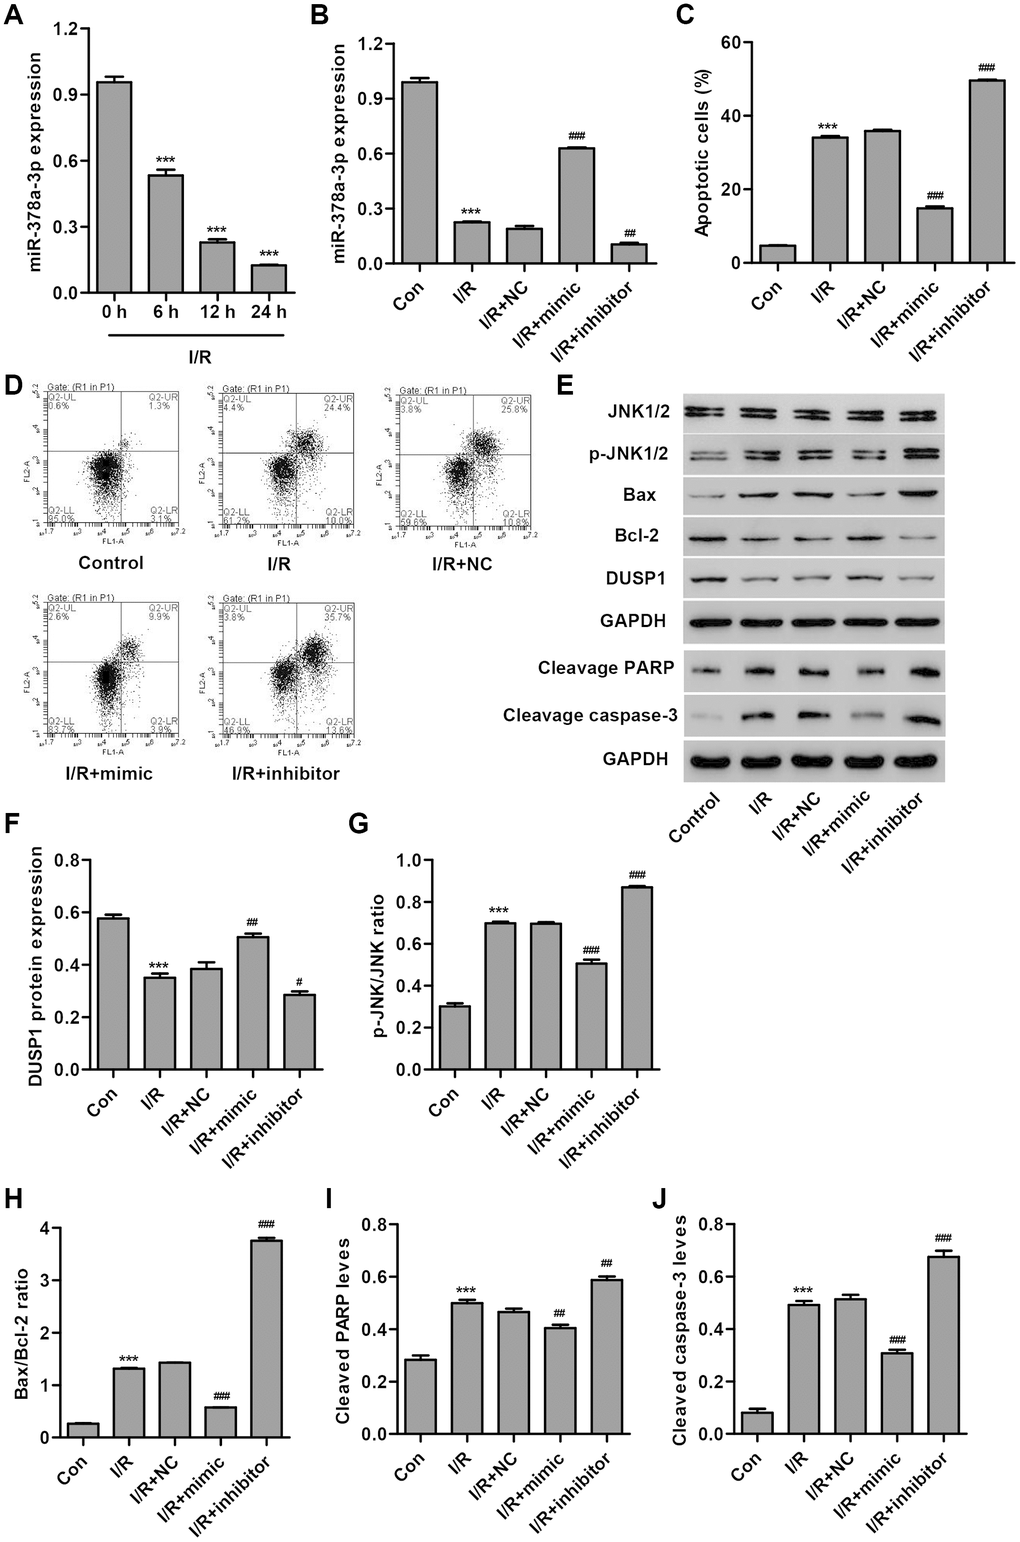 miR-378a-3p is upregulated in I/R-induced H9C2 cardiomyocytes and inhibits cell apoptosis. (A) miR-378a-3p expression was measured by Real-time PCR in H9C2 cardiomyocytes following 3 h ischemia and 6, 12 or 24 h reperfusion. H9C2 cardiomyocytes following 3 h ischemia and 24 h reperfusion were transfected with a miR-378a-3p mimic, inhibitor or negative control (NC) and those without I/R injury were used as a control. (B) miR-378a-3p expression, (C, D) cell apoptosis, and (E–J) protein expression of DUSP1, p-JNK1/2, JNK1/2, cleaved PARP and caspase-3, Bax, and Bcl-2 were measured. ***P #P ##P ###P